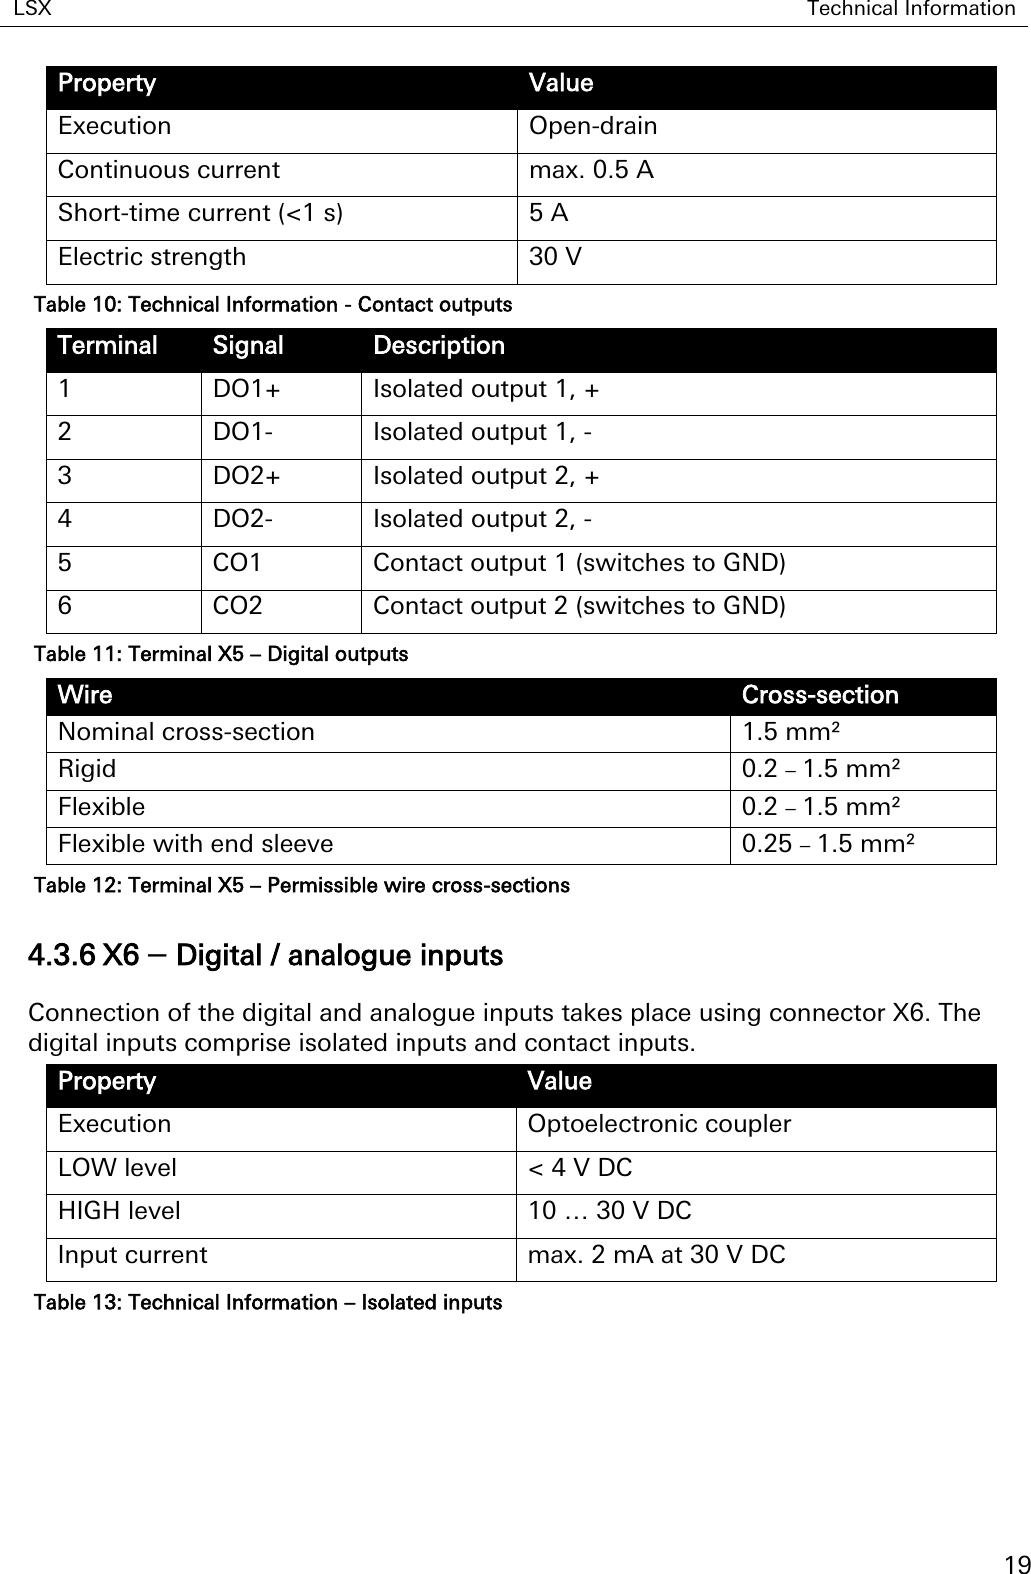 LSX Technical Information   19 Property Value Execution Open-drain Continuous current max. 0.5 A Short-time current (&lt;1 s) 5 A Electric strength 30 V Table 10: Technical Information - Contact outputs Terminal Signal Description 1 DO1+ Isolated output 1, + 2 DO1- Isolated output 1, - 3 DO2+ Isolated output 2, + 4 DO2- Isolated output 2, - 5 CO1 Contact output 1 (switches to GND) 6 CO2 Contact output 2 (switches to GND) Table 11: Terminal X5 – Digital outputs Wire Cross-section Nominal cross-section 1.5 mm² Rigid 0.2 – 1.5 mm² Flexible 0.2 – 1.5 mm² Flexible with end sleeve 0.25 – 1.5 mm² Table 12: Terminal X5 – Permissible wire cross-sections 4.3.6 X6 – Digital / analogue inputs Connection of the digital and analogue inputs takes place using connector X6. The digital inputs comprise isolated inputs and contact inputs. Property Value Execution Optoelectronic coupler LOW level &lt; 4 V DC HIGH level 10 … 30 V DC Input current max. 2 mA at 30 V DC Table 13: Technical Information – Isolated inputs 